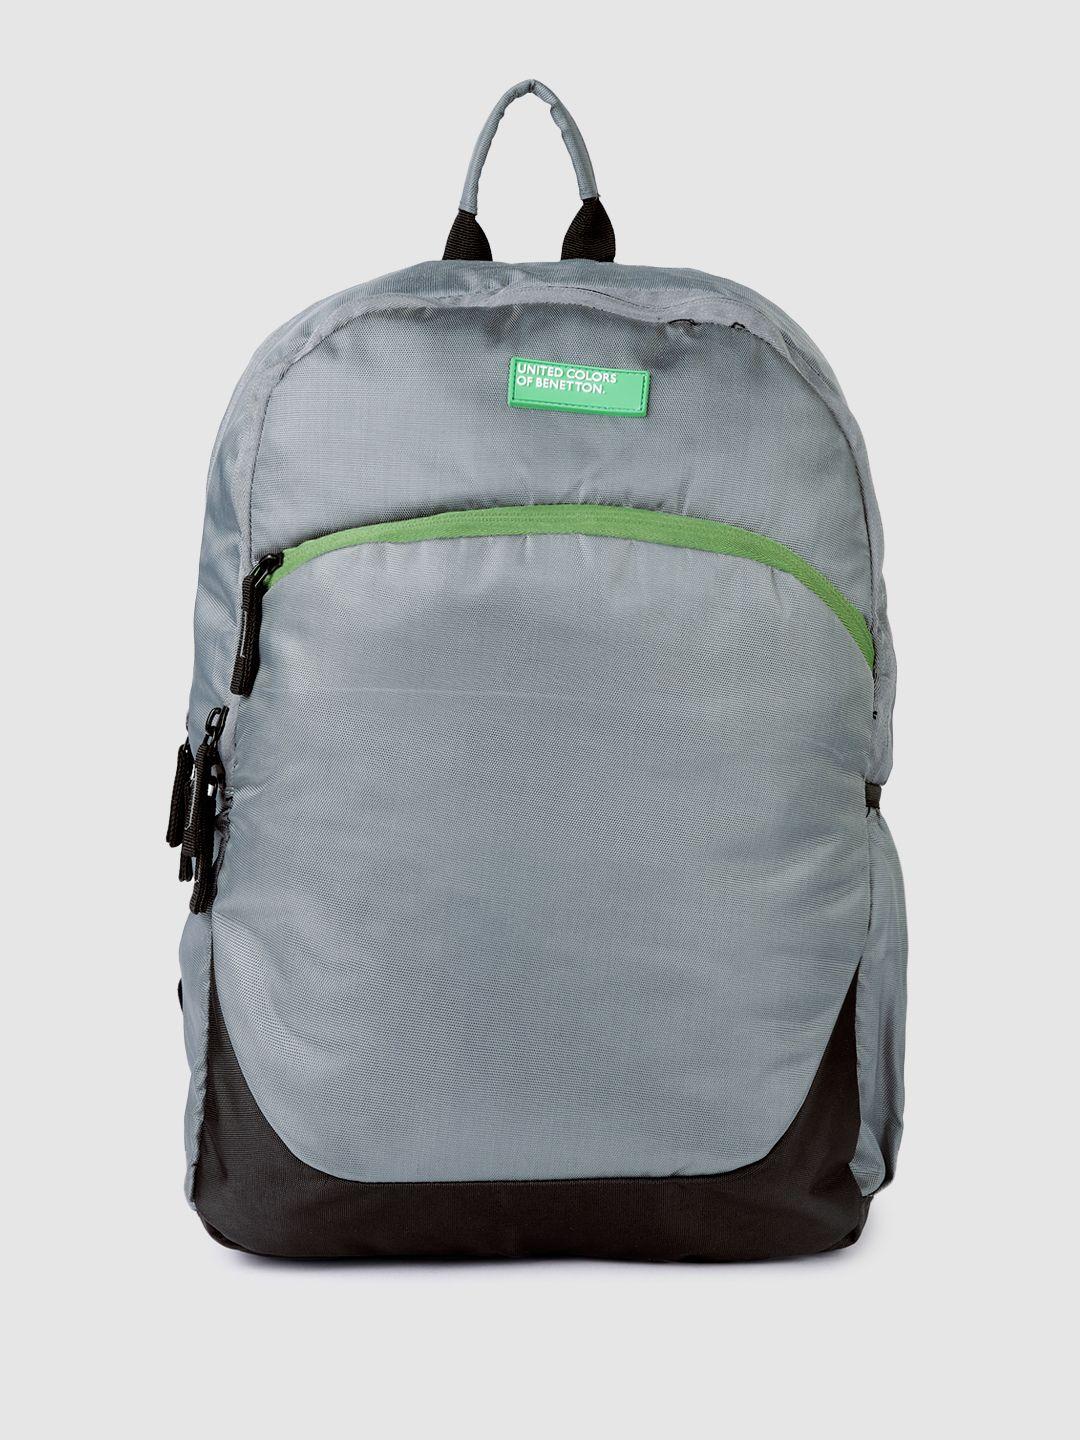 united colors of benetton unisex solid backpack